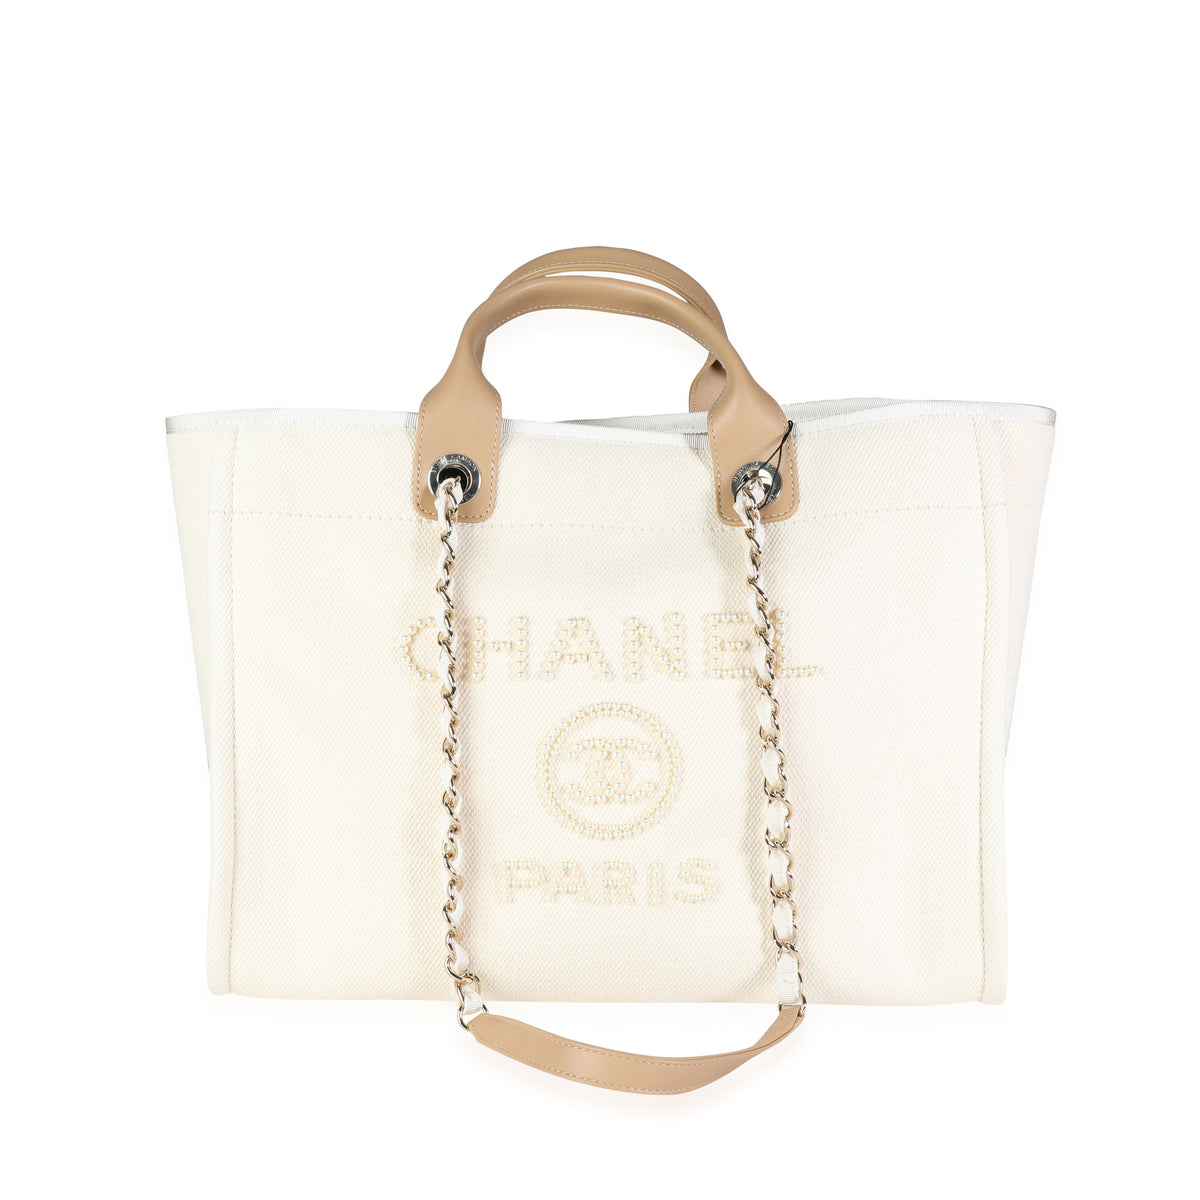 Chanel Natural Canvas and Tan Leather Large Pearl Deauville Tote, myGemma